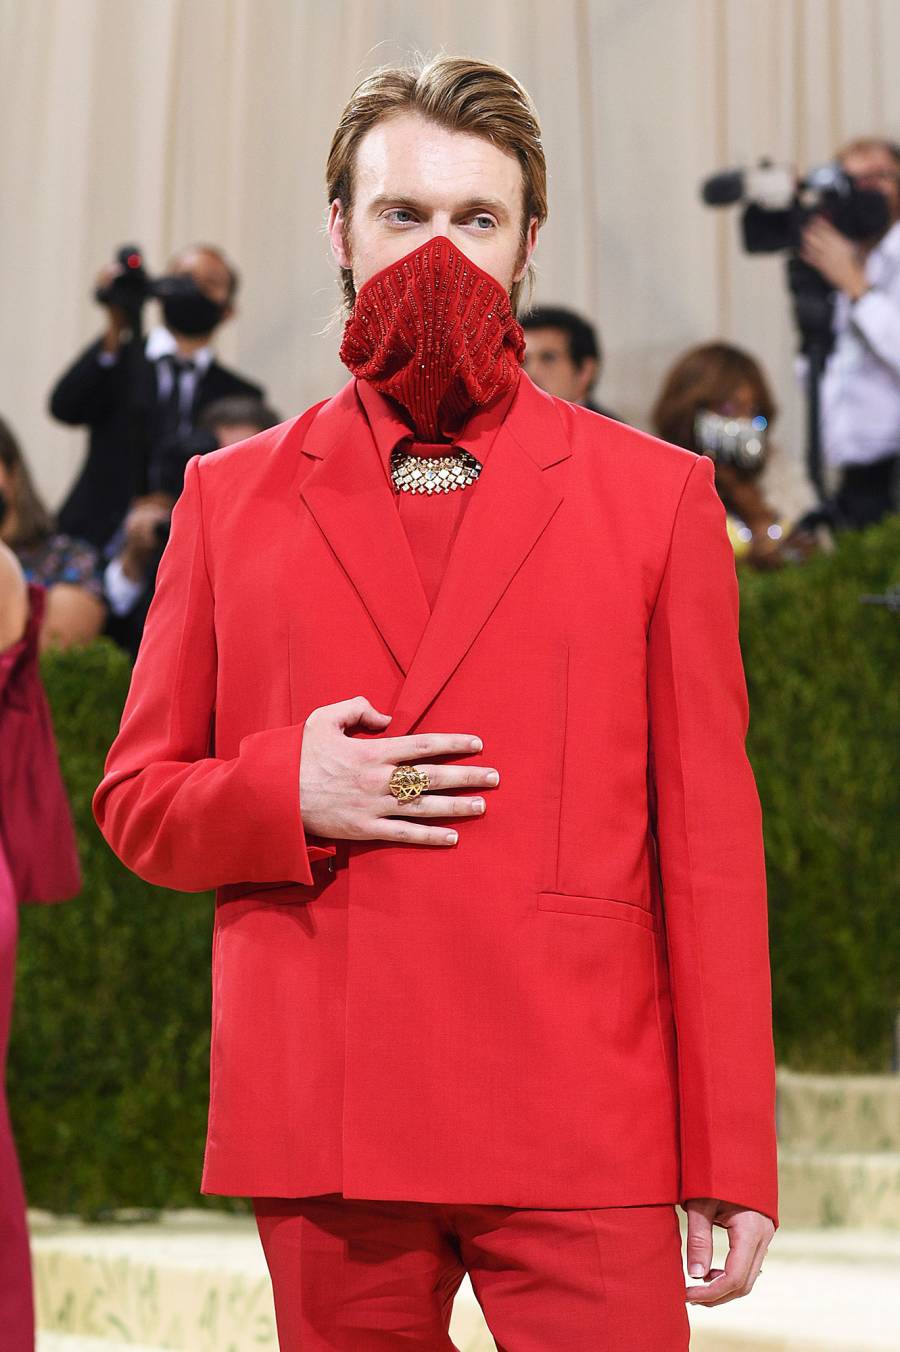 Finneas O’Conner Most Extravagant Celebrity Bling From the 2021 Met Gala